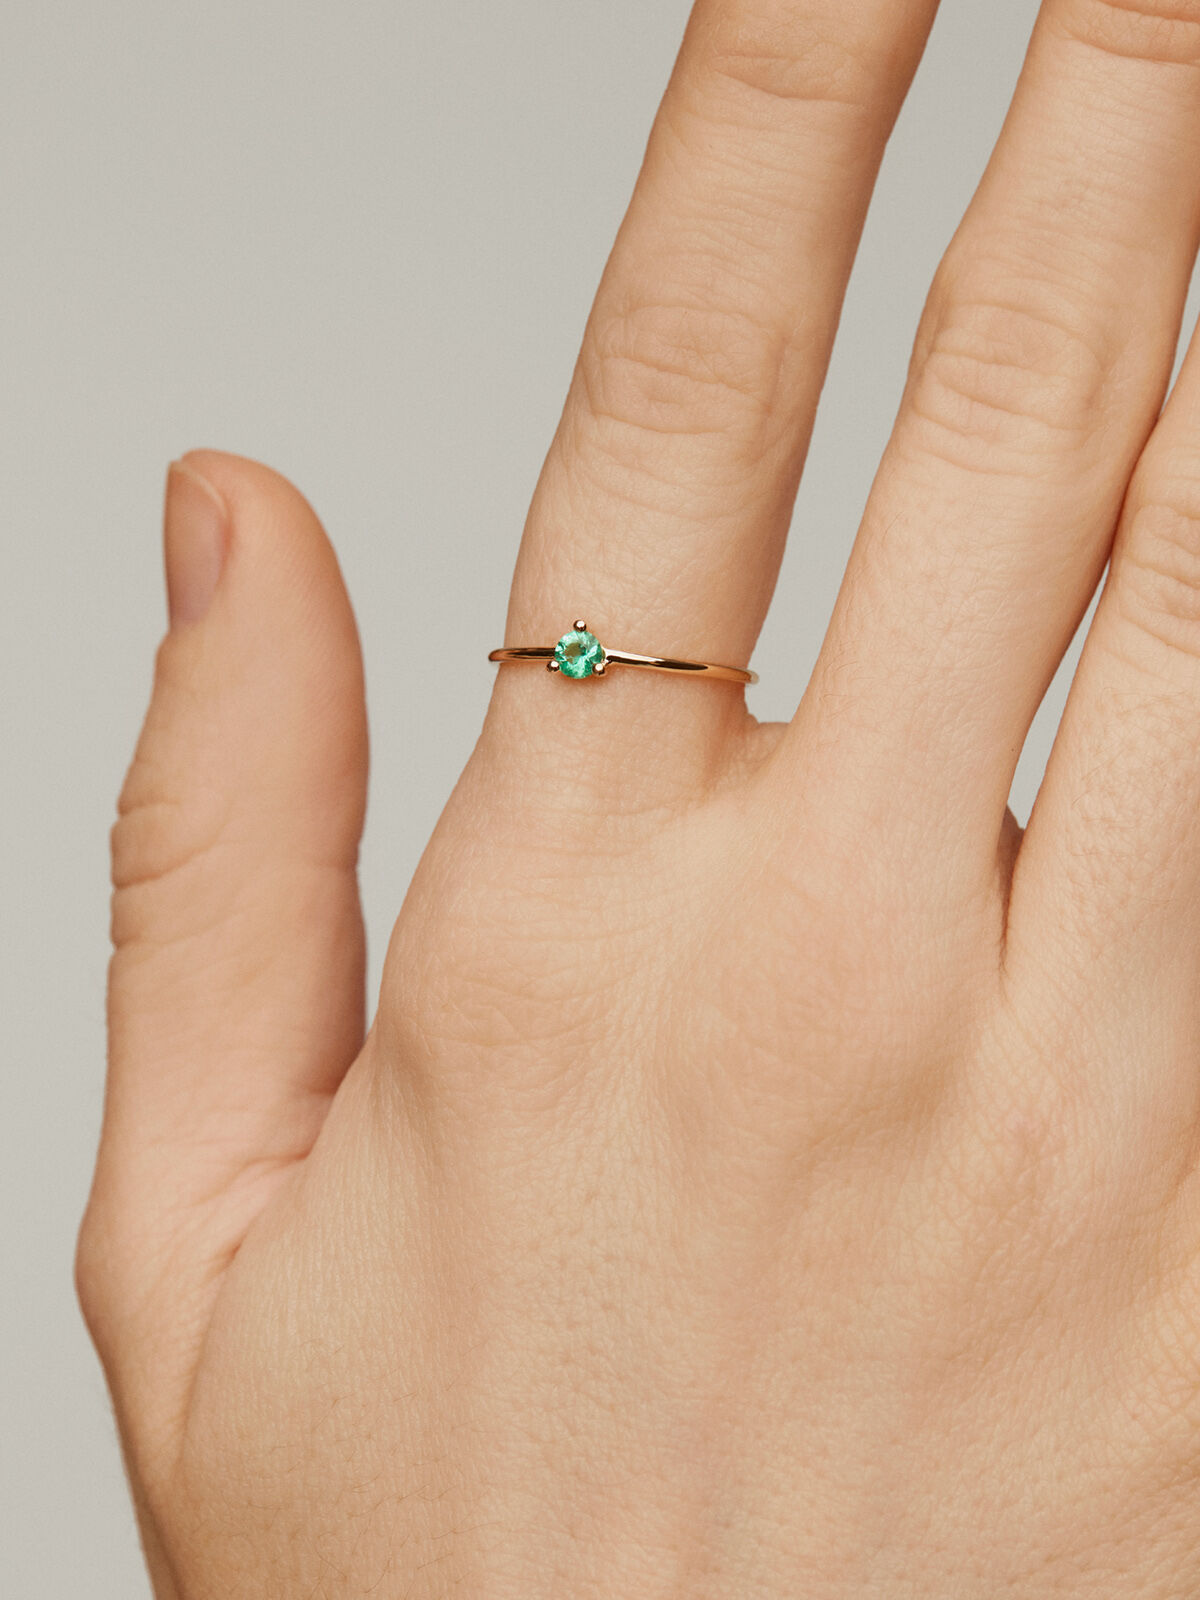 9K Yellow Gold Ring with Green Emerald | Aristocrazy